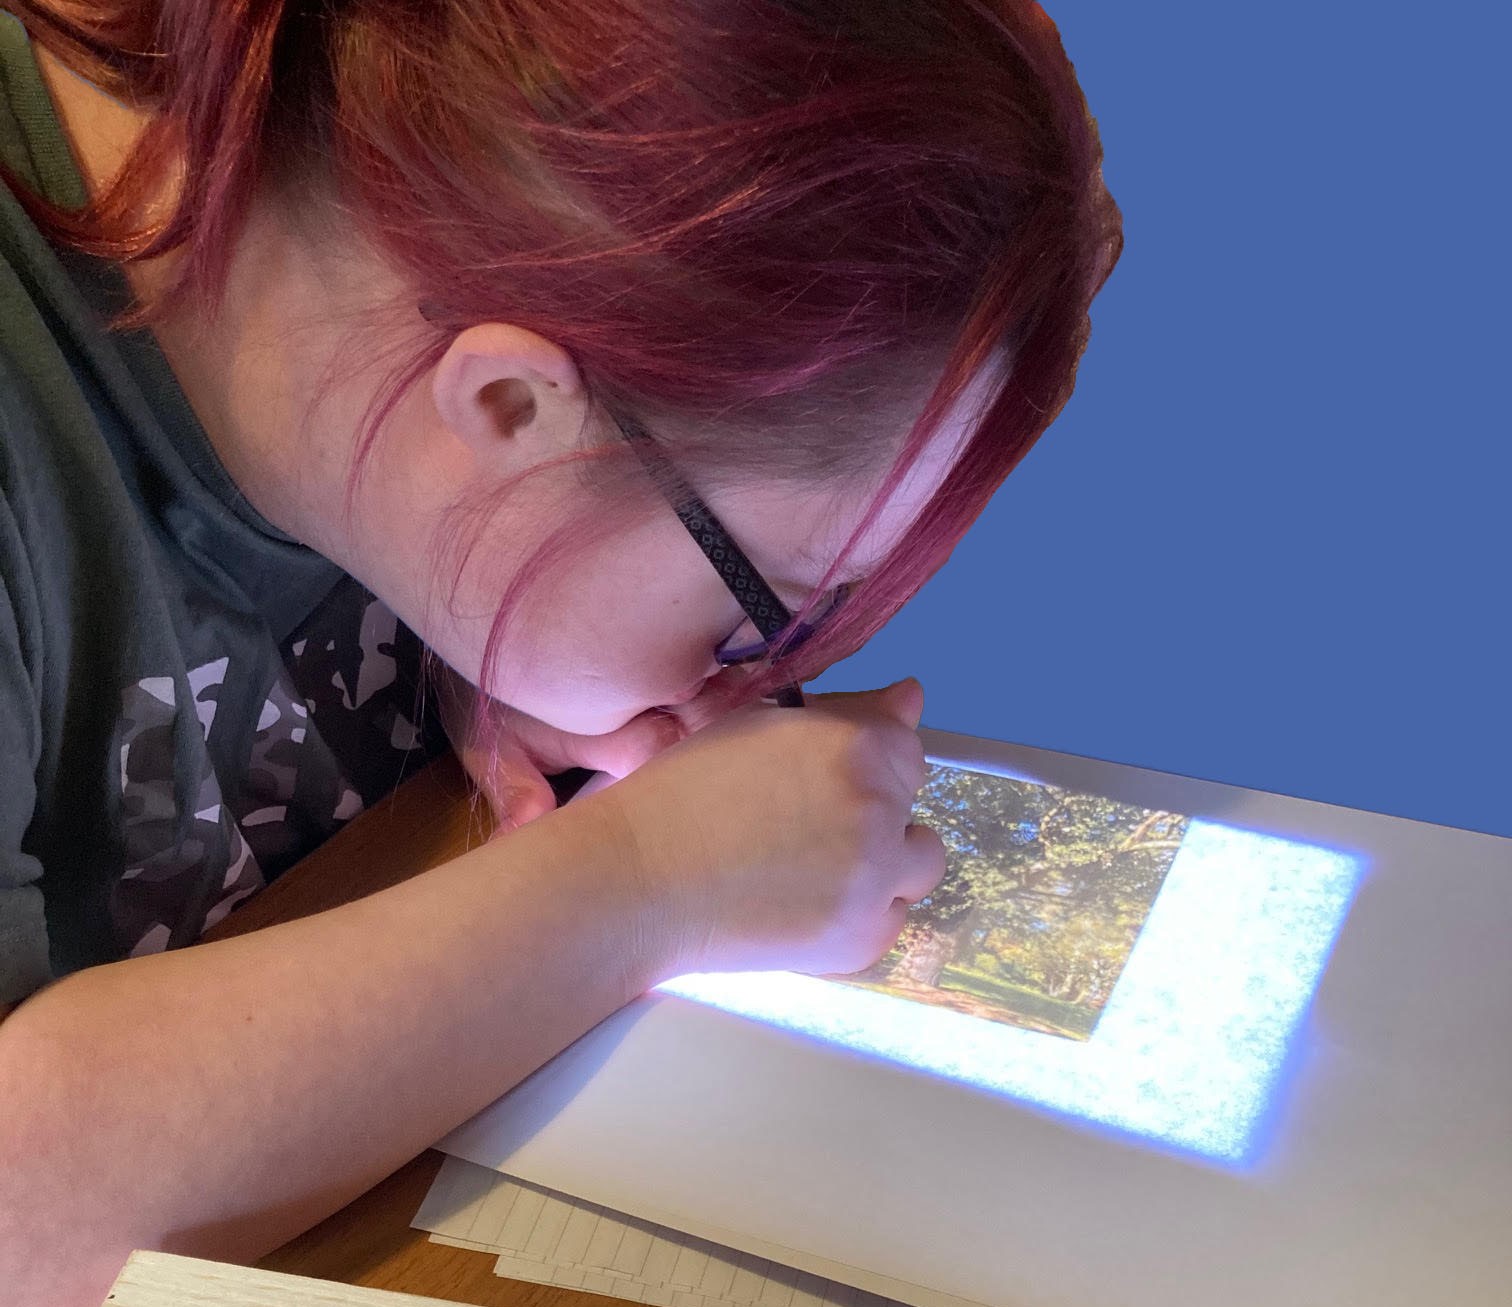 An Able Arts artist is drawing on a screen in front of her.